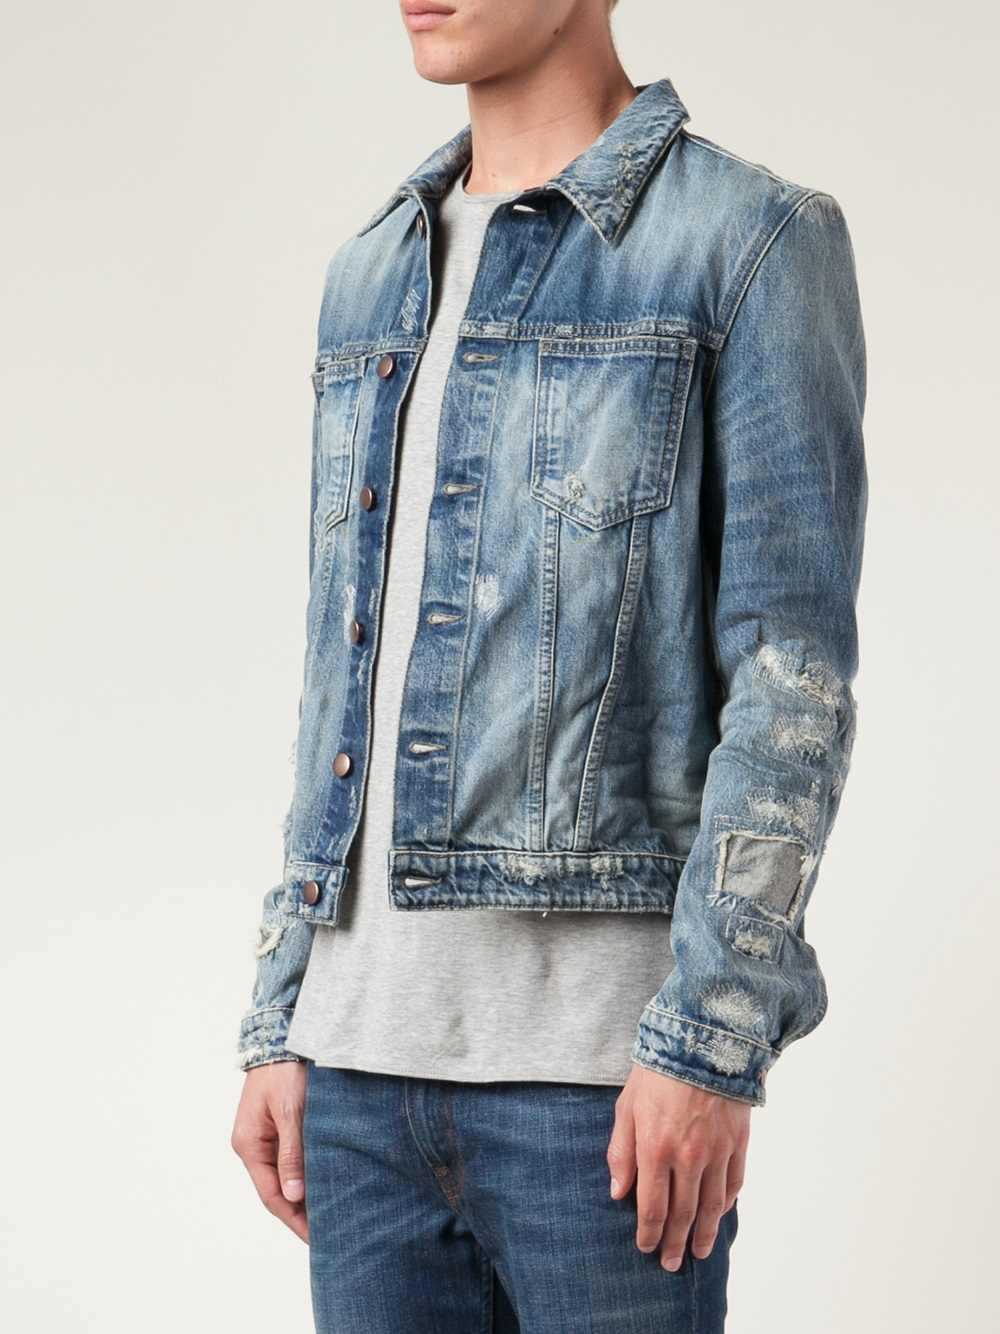 Lyst - Closed Distressed Jean Jacket in Blue for Men